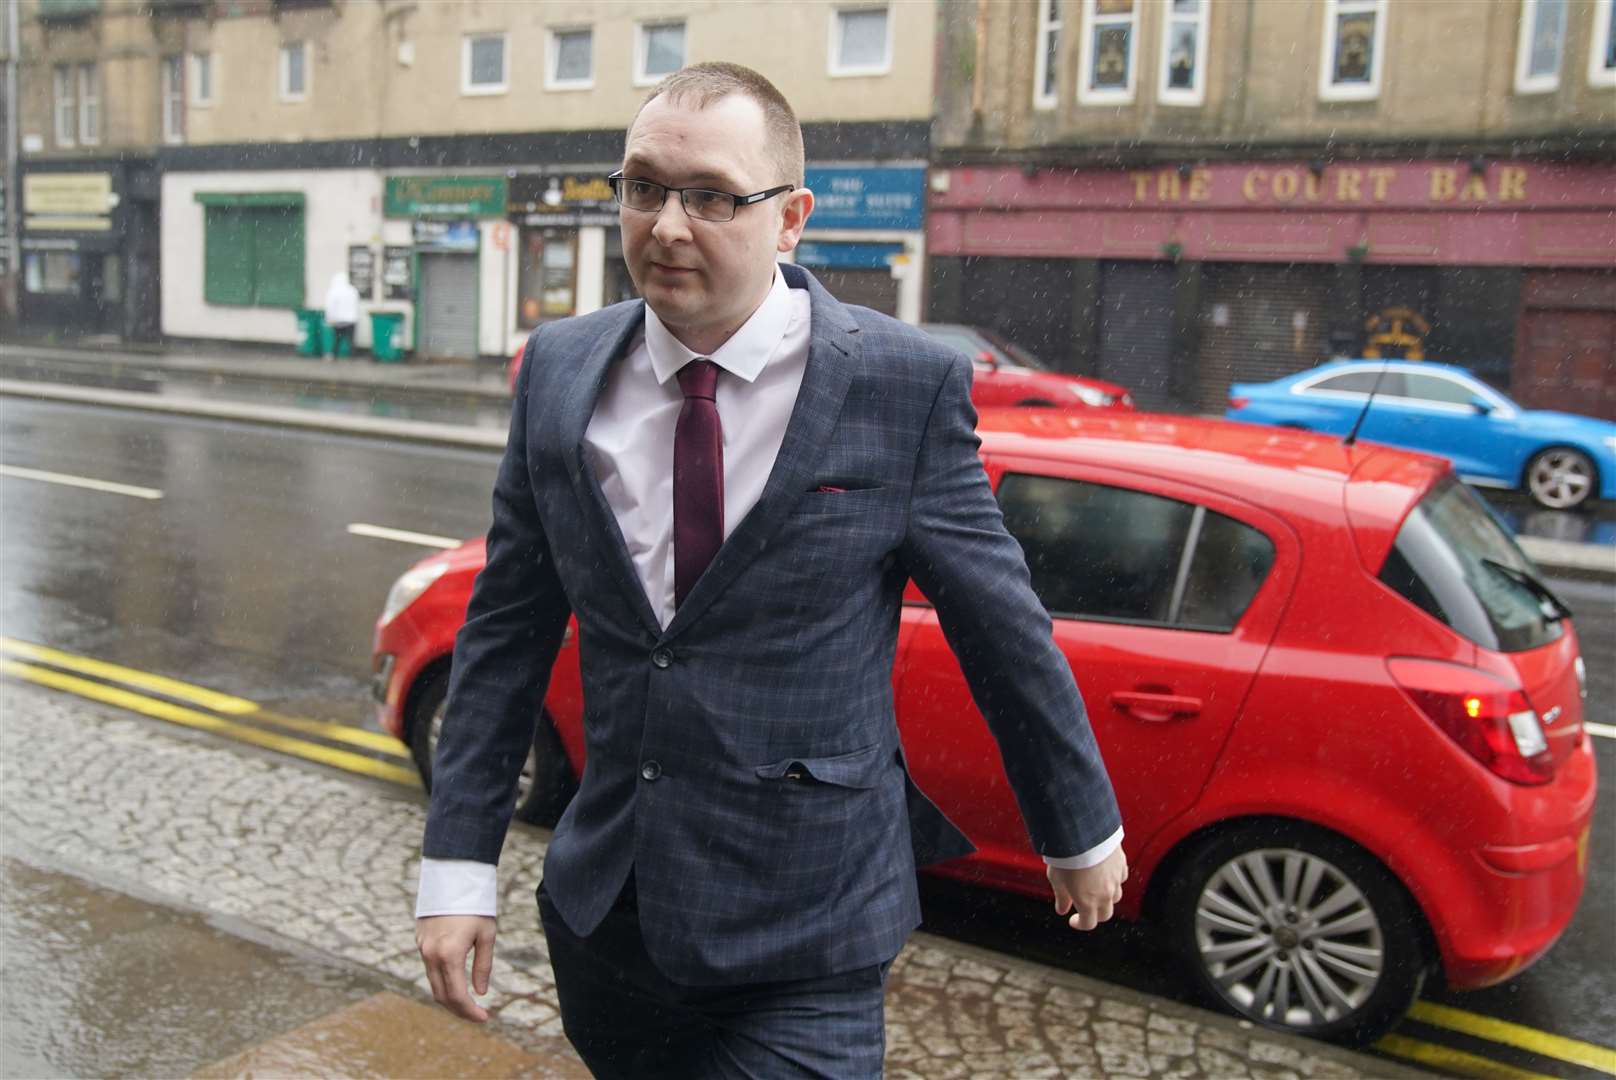 Night porter Christopher O’Malley has previously admitted breaching health and safety rules (Andrew Milligan/PA)